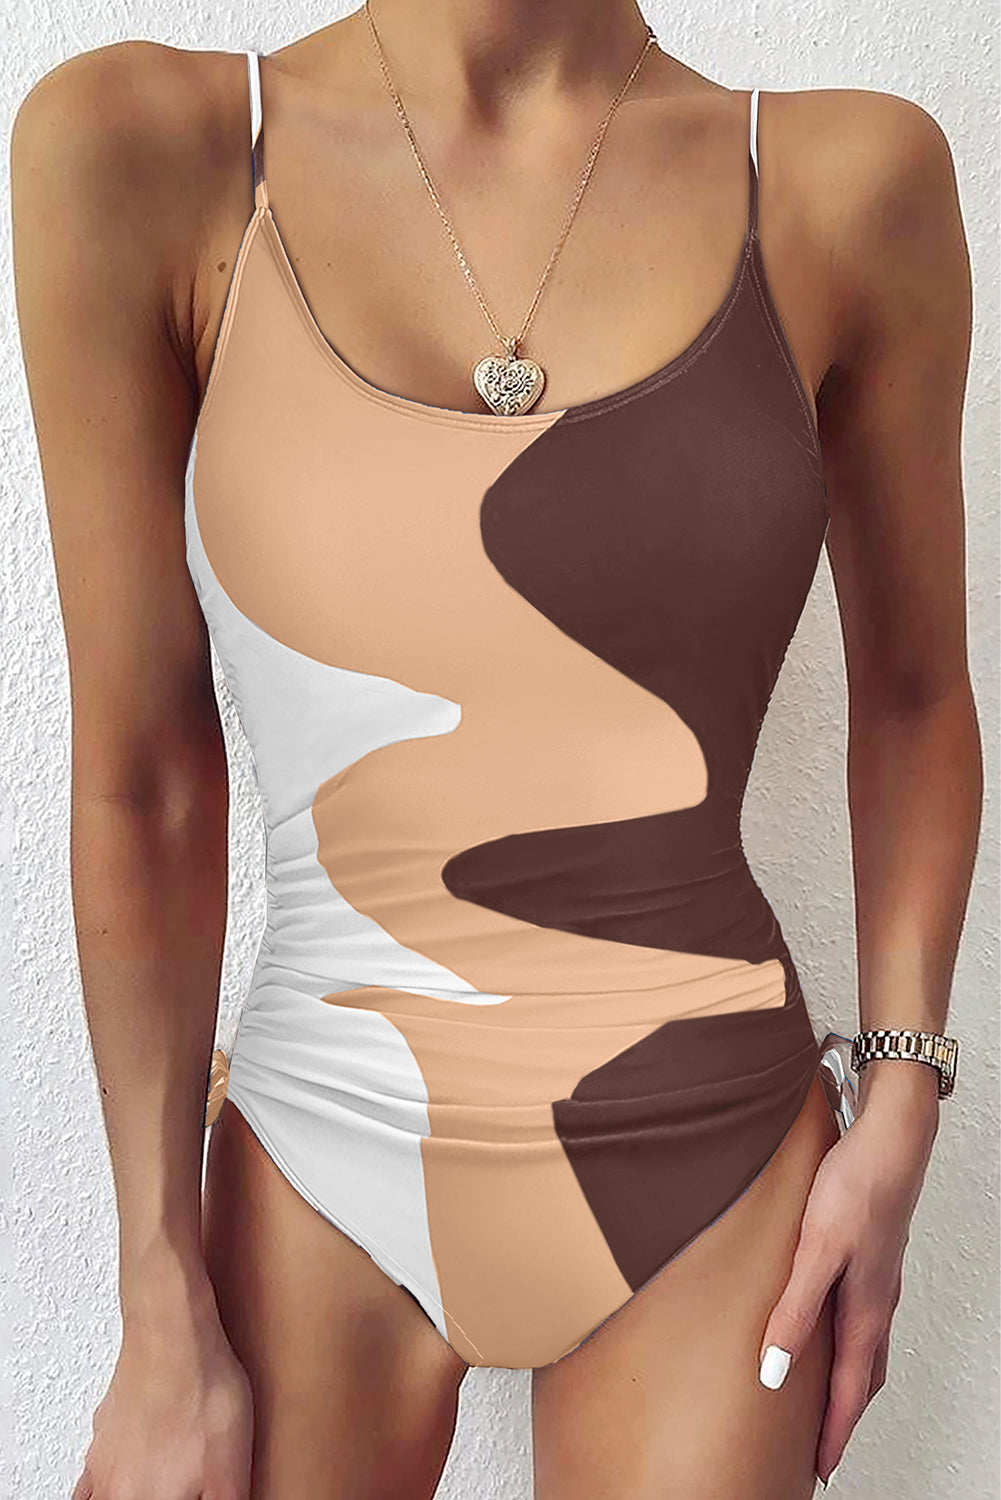 Khaki Printed Color Block Drawstring Sides One Piece Swimsuit